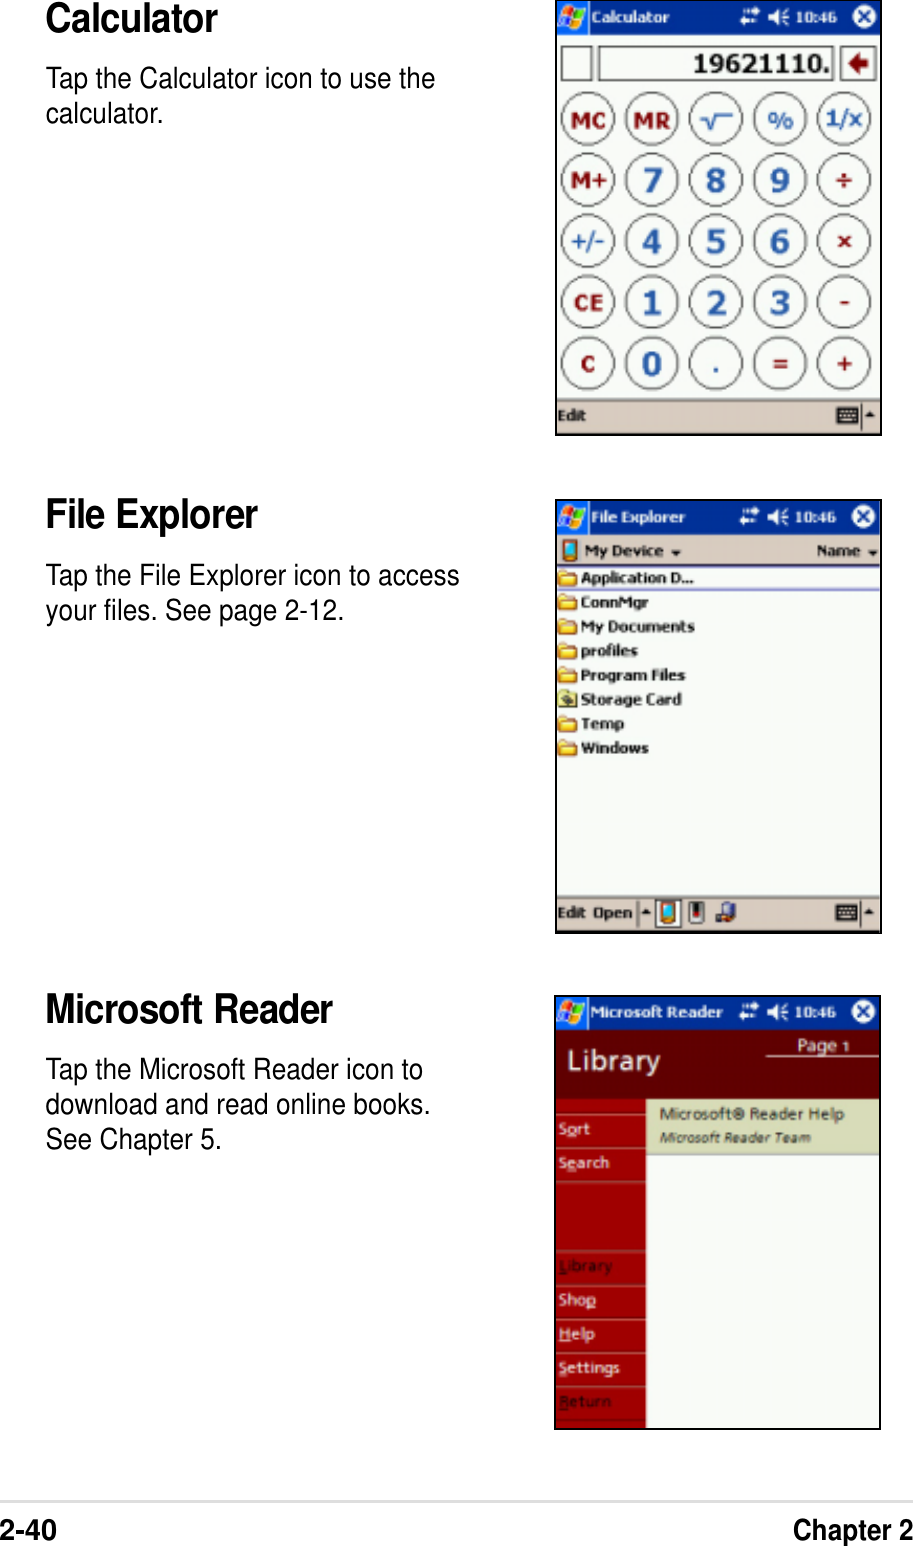 2-40Chapter 2CalculatorTap the Calculator icon to use thecalculator.File ExplorerTap the File Explorer icon to accessyour files. See page 2-12.Microsoft ReaderTap the Microsoft Reader icon todownload and read online books.See Chapter 5.